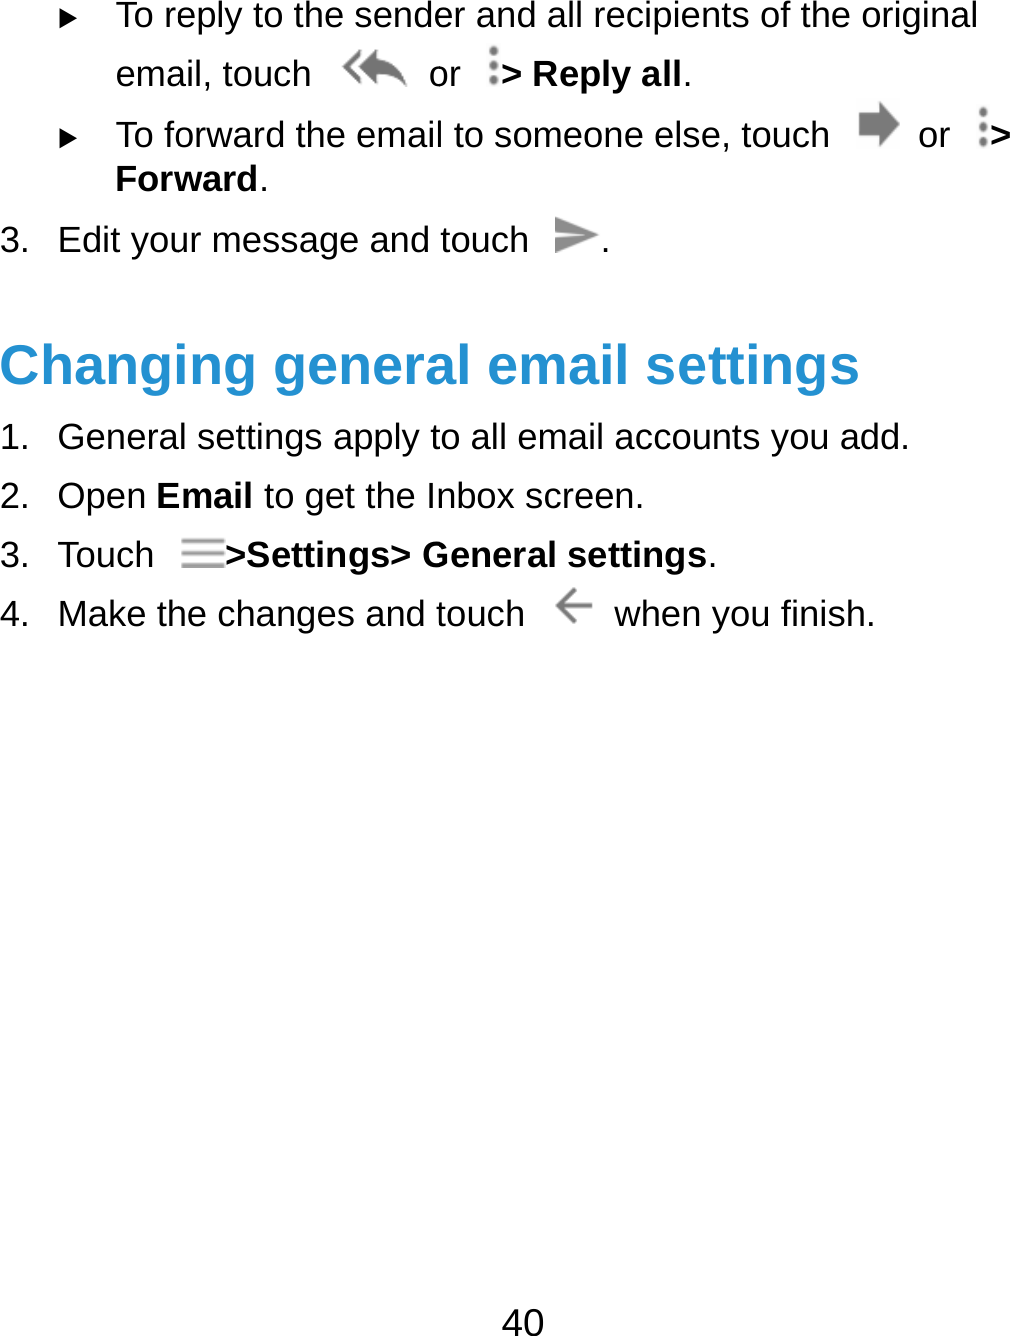   To reema To foForw3. Edit youChangi1. Genera2. Open E3. Touch 4. Make theply to the sendeail, touch   oorward the emailward. ur message and ing general settings apply tEmail to get the In&gt;Settings&gt; Ghe changes and t40 er and all recipieor  &gt; Reply all.l to someone elstouch . al email seto all email accounbox screen. General settingstouch  whennts of the originae, touch    or ettings unts you add. s.  you finish. al &gt; 